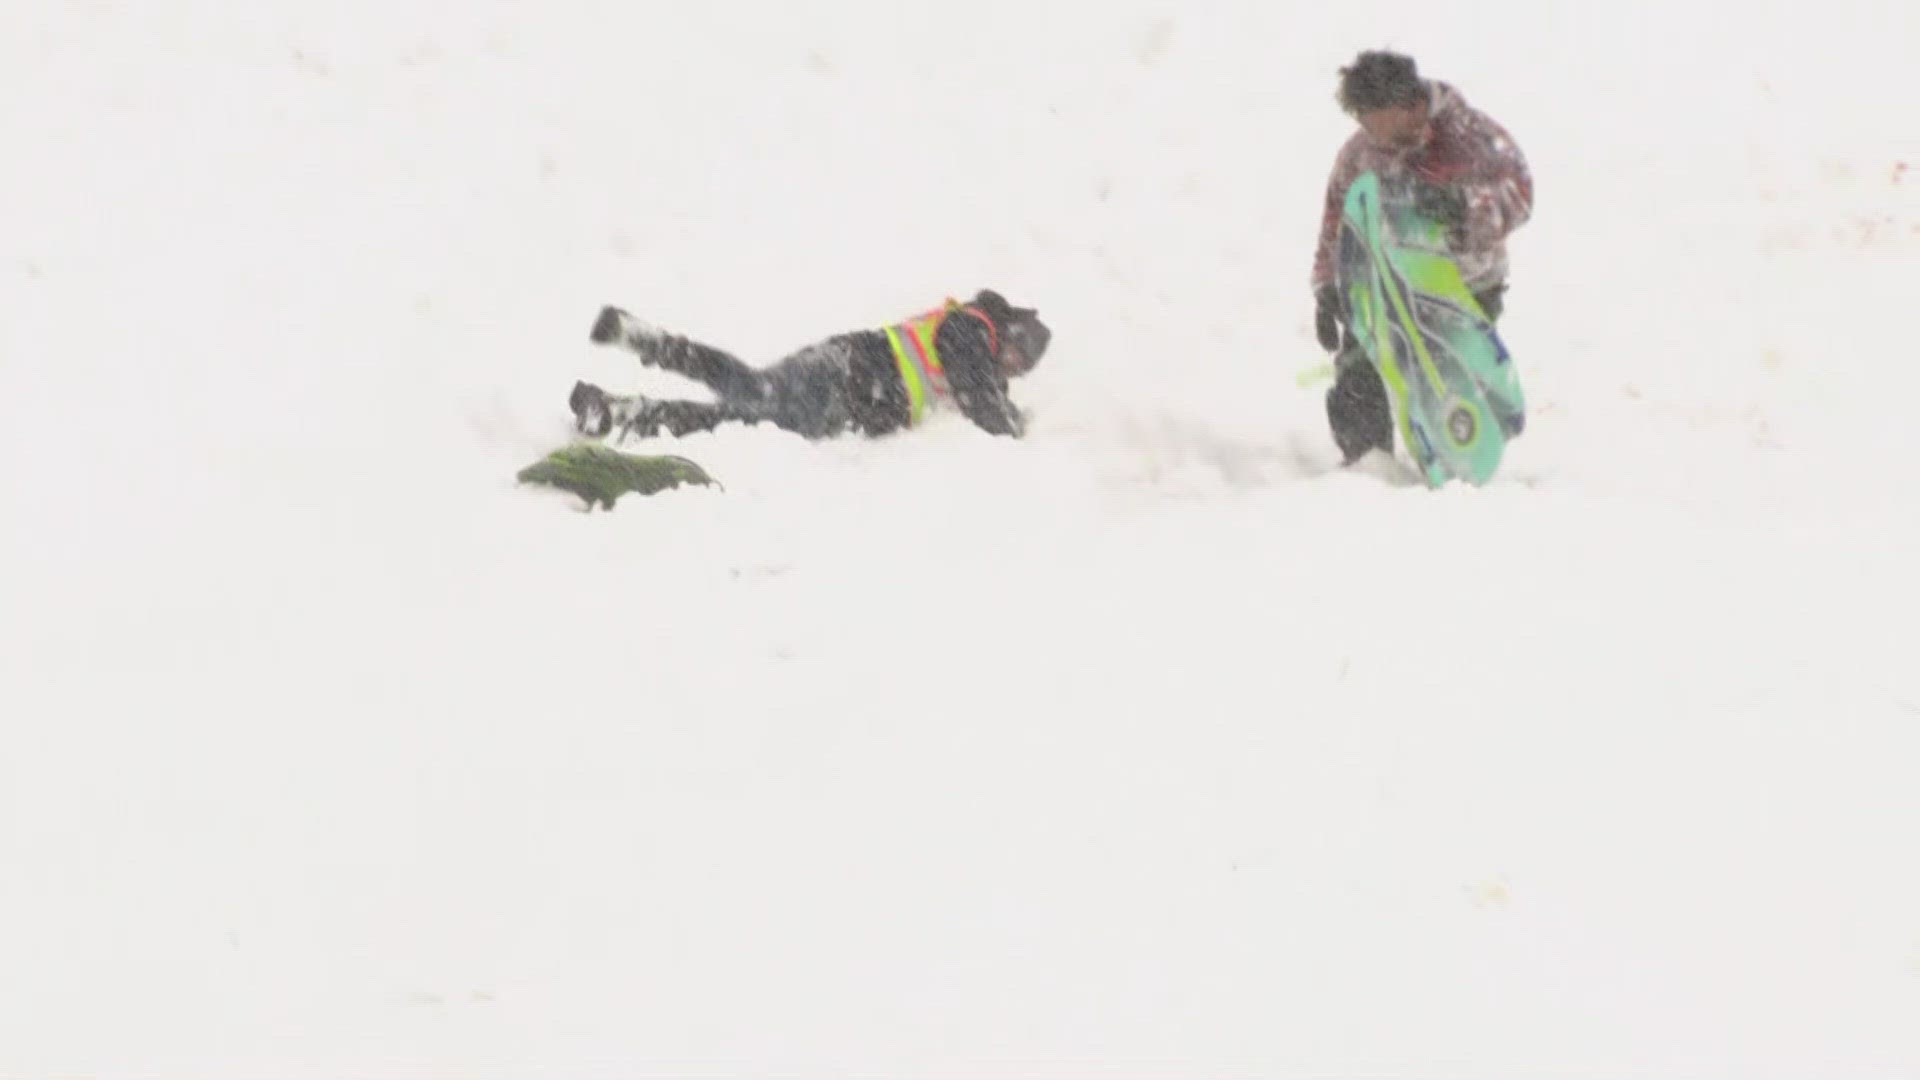 9NEWS reporter Steve Staeger took a spill while taking a break from clearing snow to go sledding with some high schoolers.